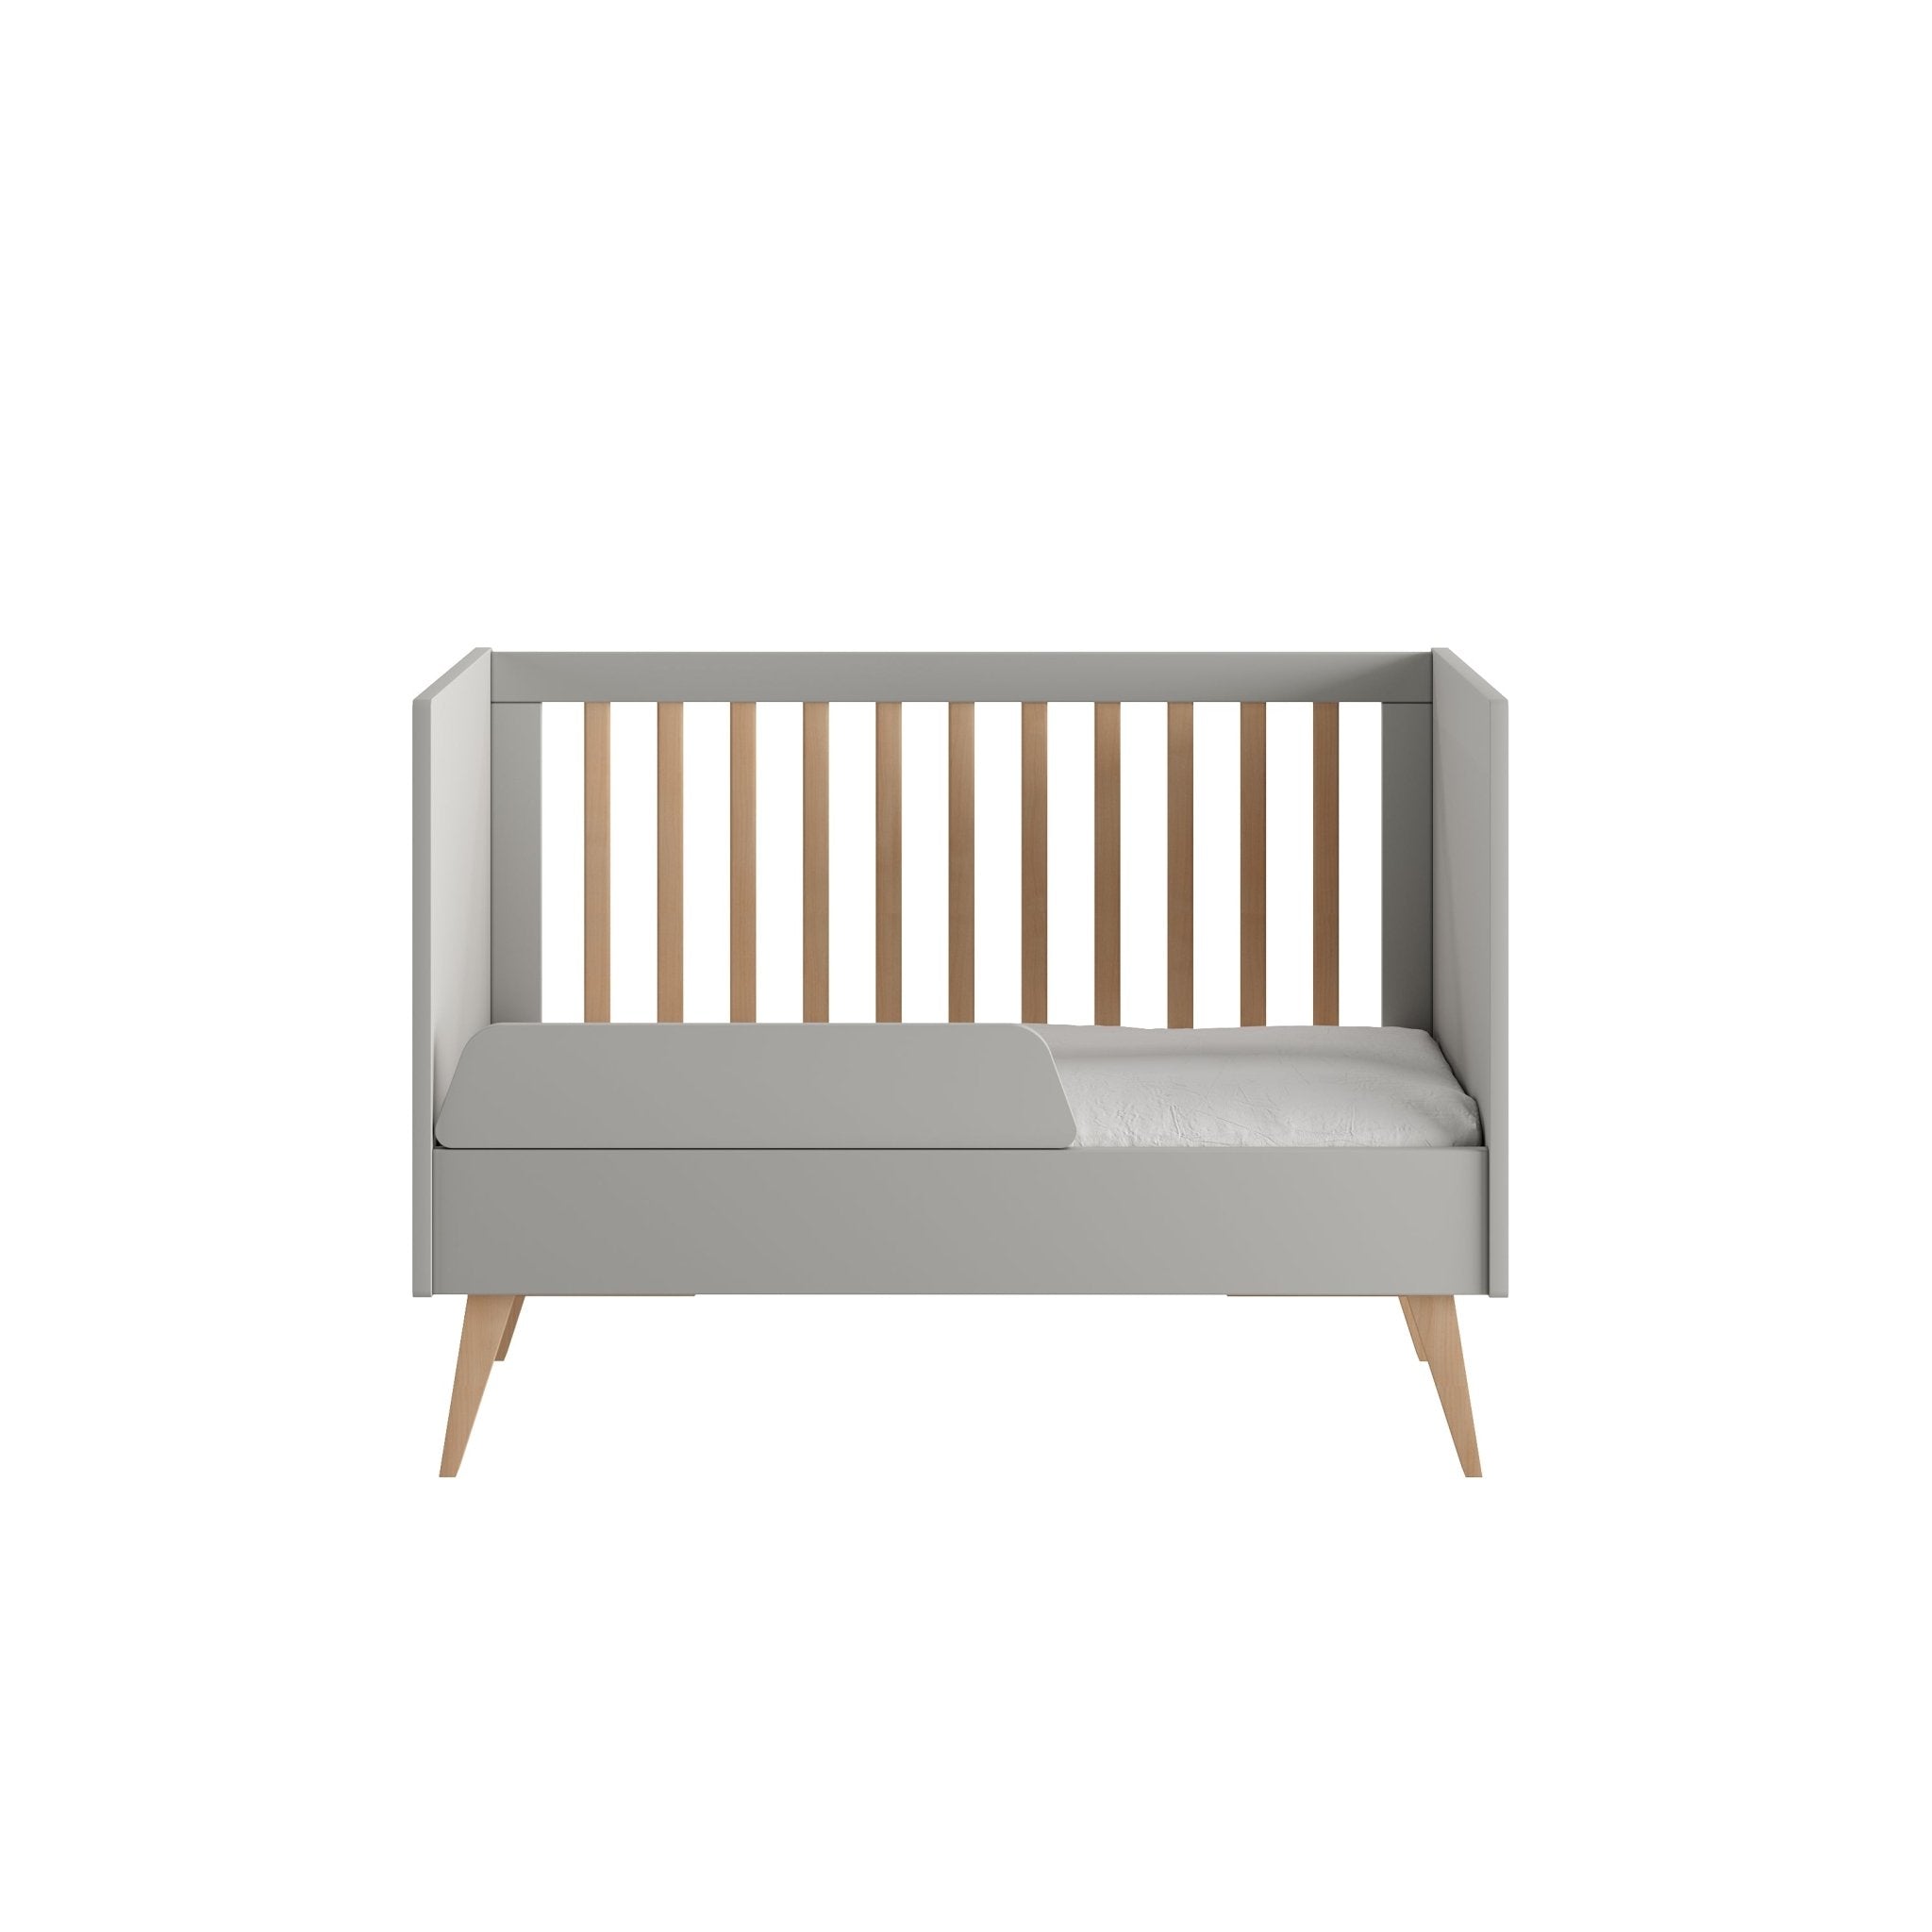 Saga Bed/Cot, Safety rail White color - Scandinavian Stories by Marton